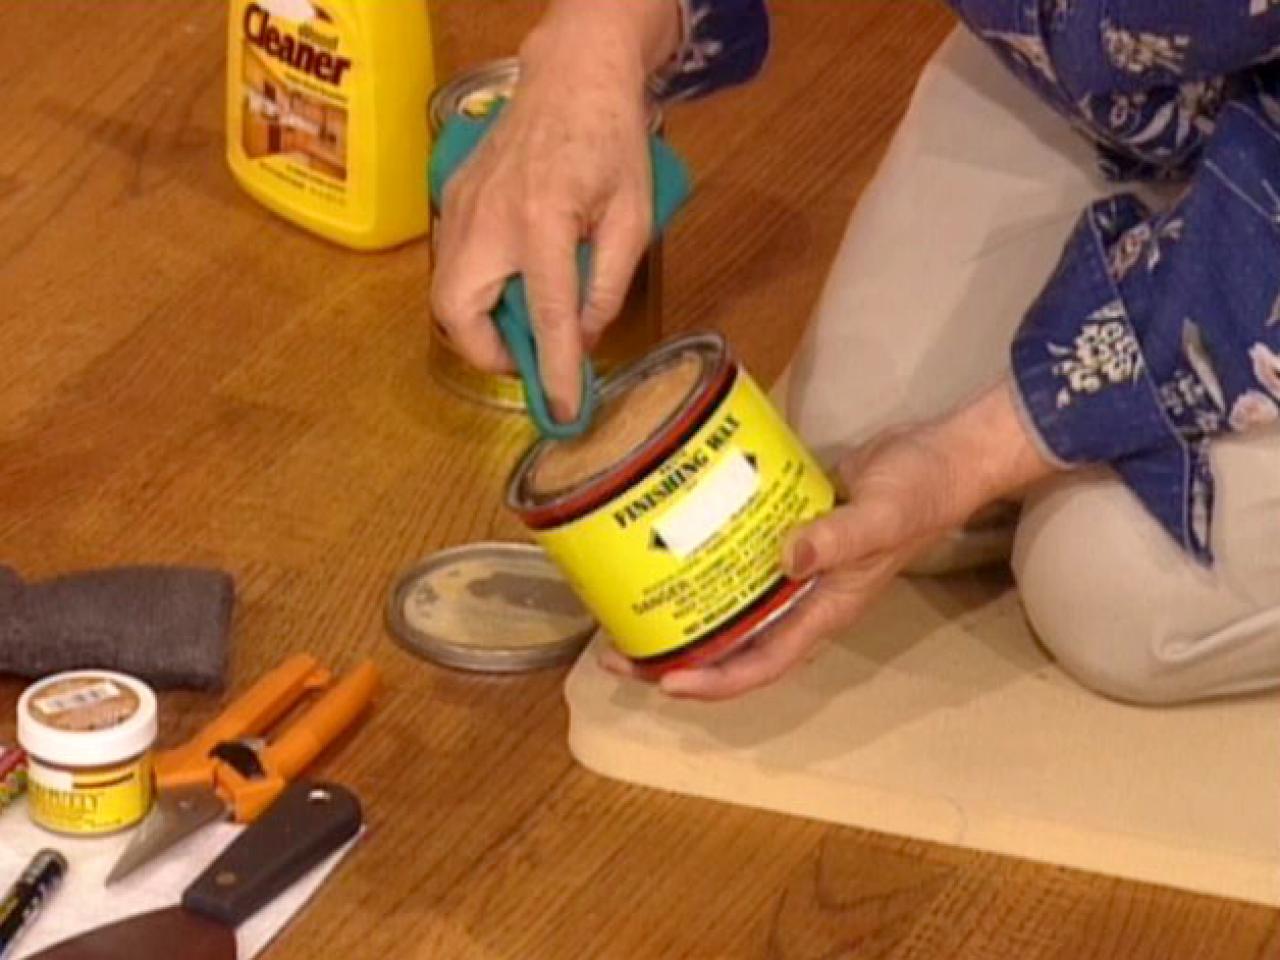 How To Touch Up Wood Floors Tos Diy, How To Fix Worn Spots On Hardwood Floors